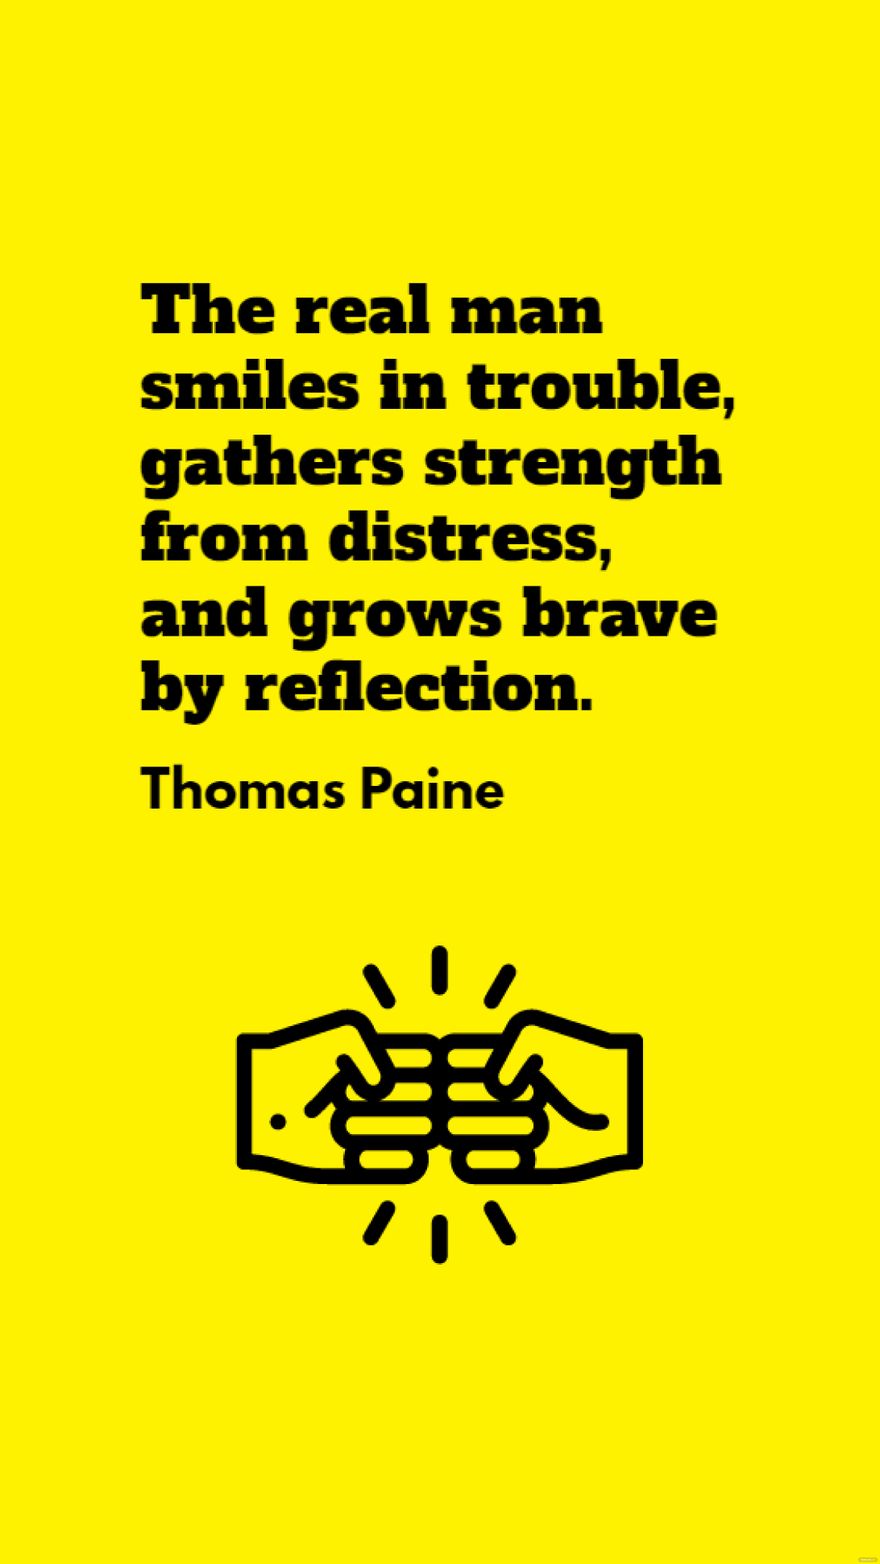 Free Thomas Paine - The real man smiles in trouble, gathers strength from distress, and grows brave by reflection. in JPG